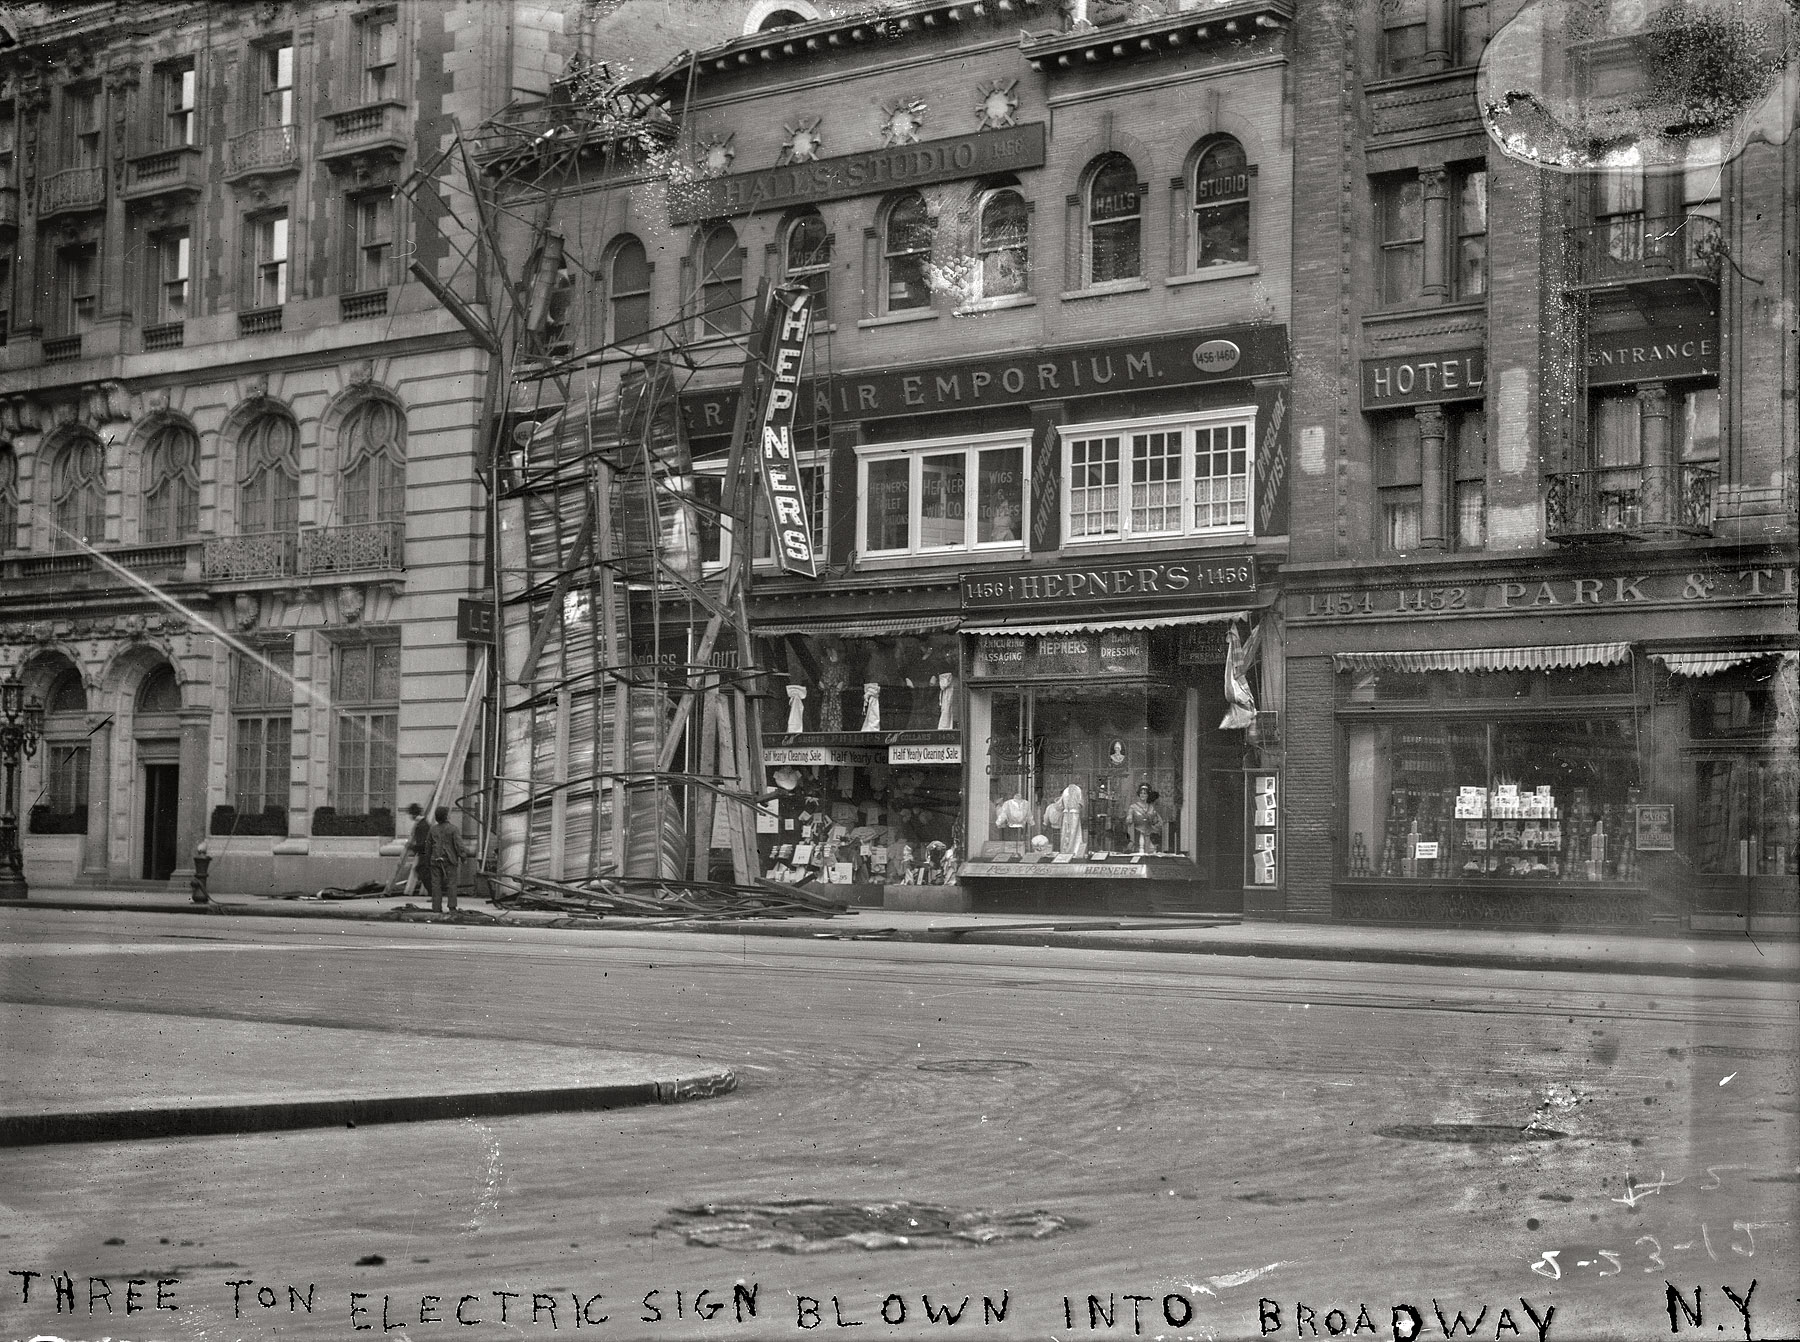 February 23, 1912. "Three-ton electric sign blown into Broadway." Our second look at the toppled sign in front of a railroad ticket office and Hepner's Hair Emporium. From the New York Times account the 100 mph gale: "An electric sign, 100 by 200 feet, on the roof of the Kohn Building, just south of the Hotel Knickerbocker, caught one of the worst puffs of the big wind and toppled over into Times Square. A policeman, who had just darted into the store on the ground floor to warn those within that the sign was coming down, barely escaped it as it fell. The sign, weighing nearly two tons, crashed over into the street, still clasped hinge-like to its moorings at the bent base, while the top, crumbling into the street, shattered to bits a large plateglass window in the Lehigh Valley Railroad's office on the ground floor." George Grantham Bain Collection. View full size.